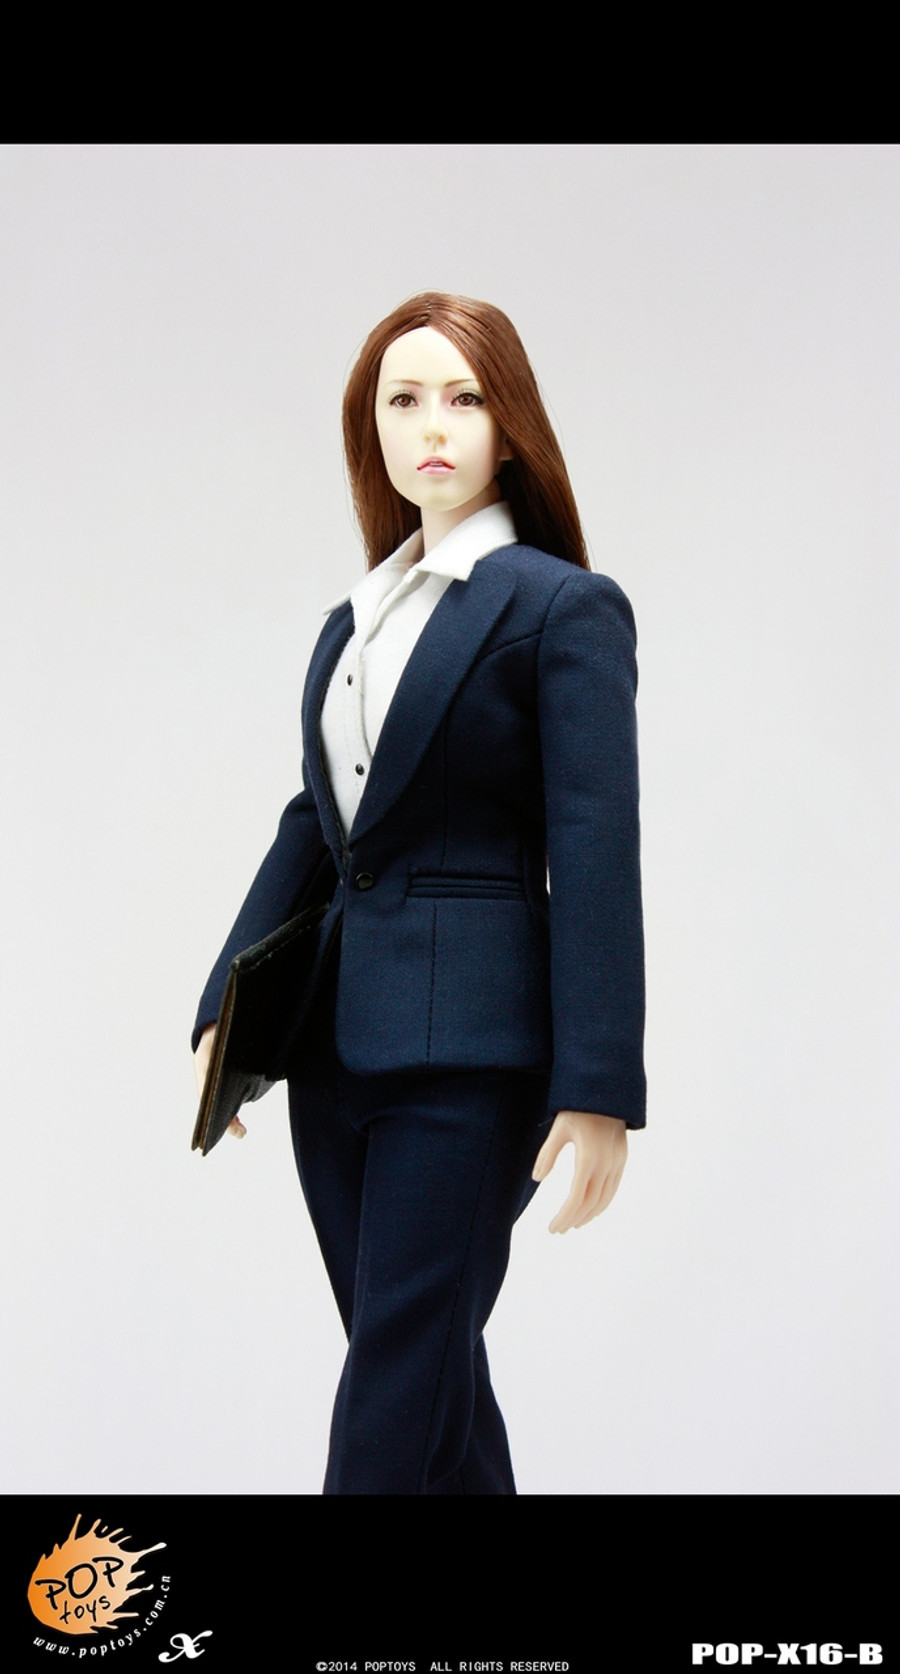 Workplace Female Elite - Office Lady Suit 2.0 Navy Blue